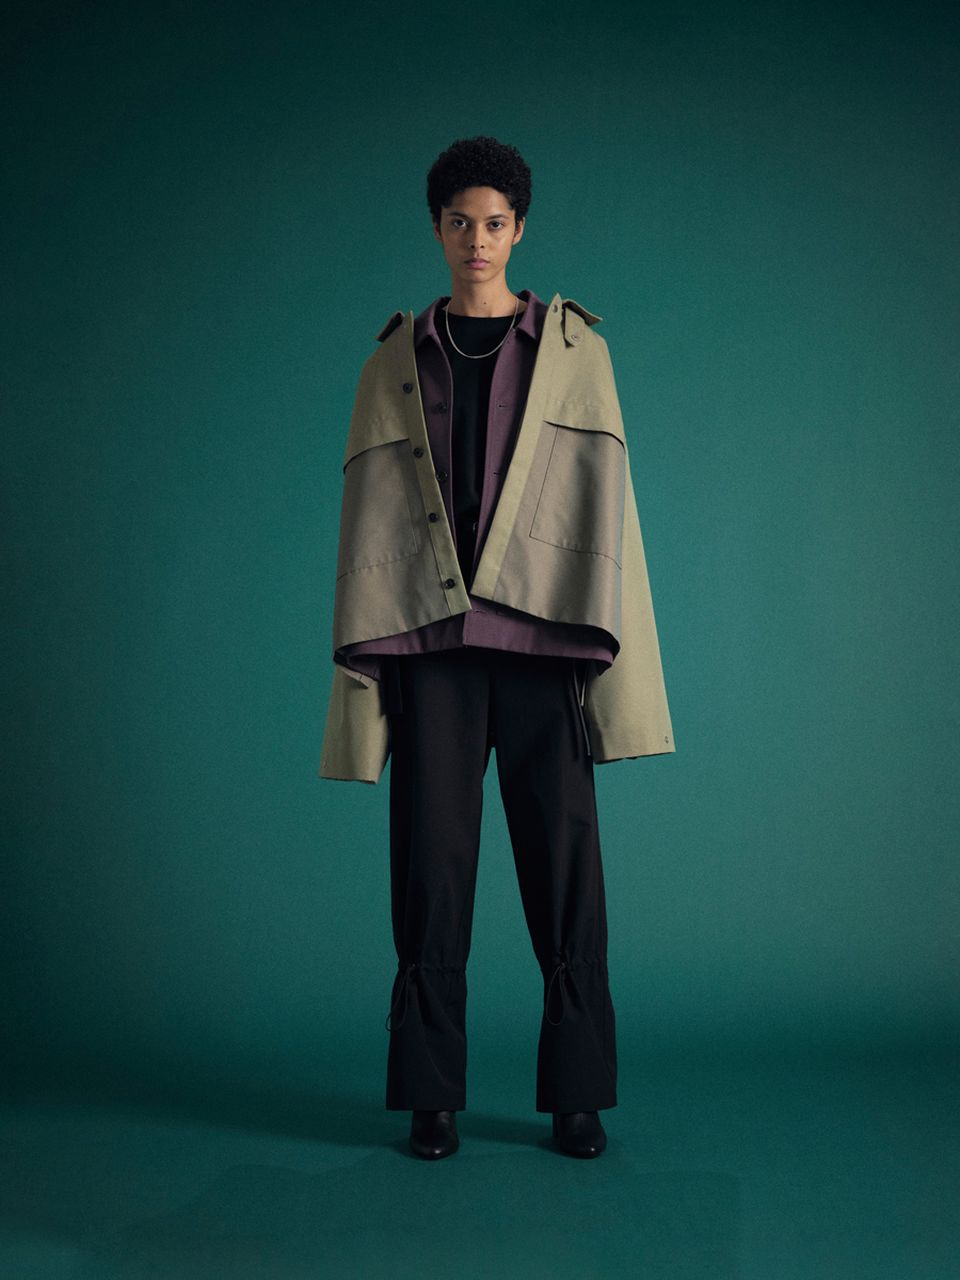 Coda's FW21 Collection Exemplifies Masterful Minimalism